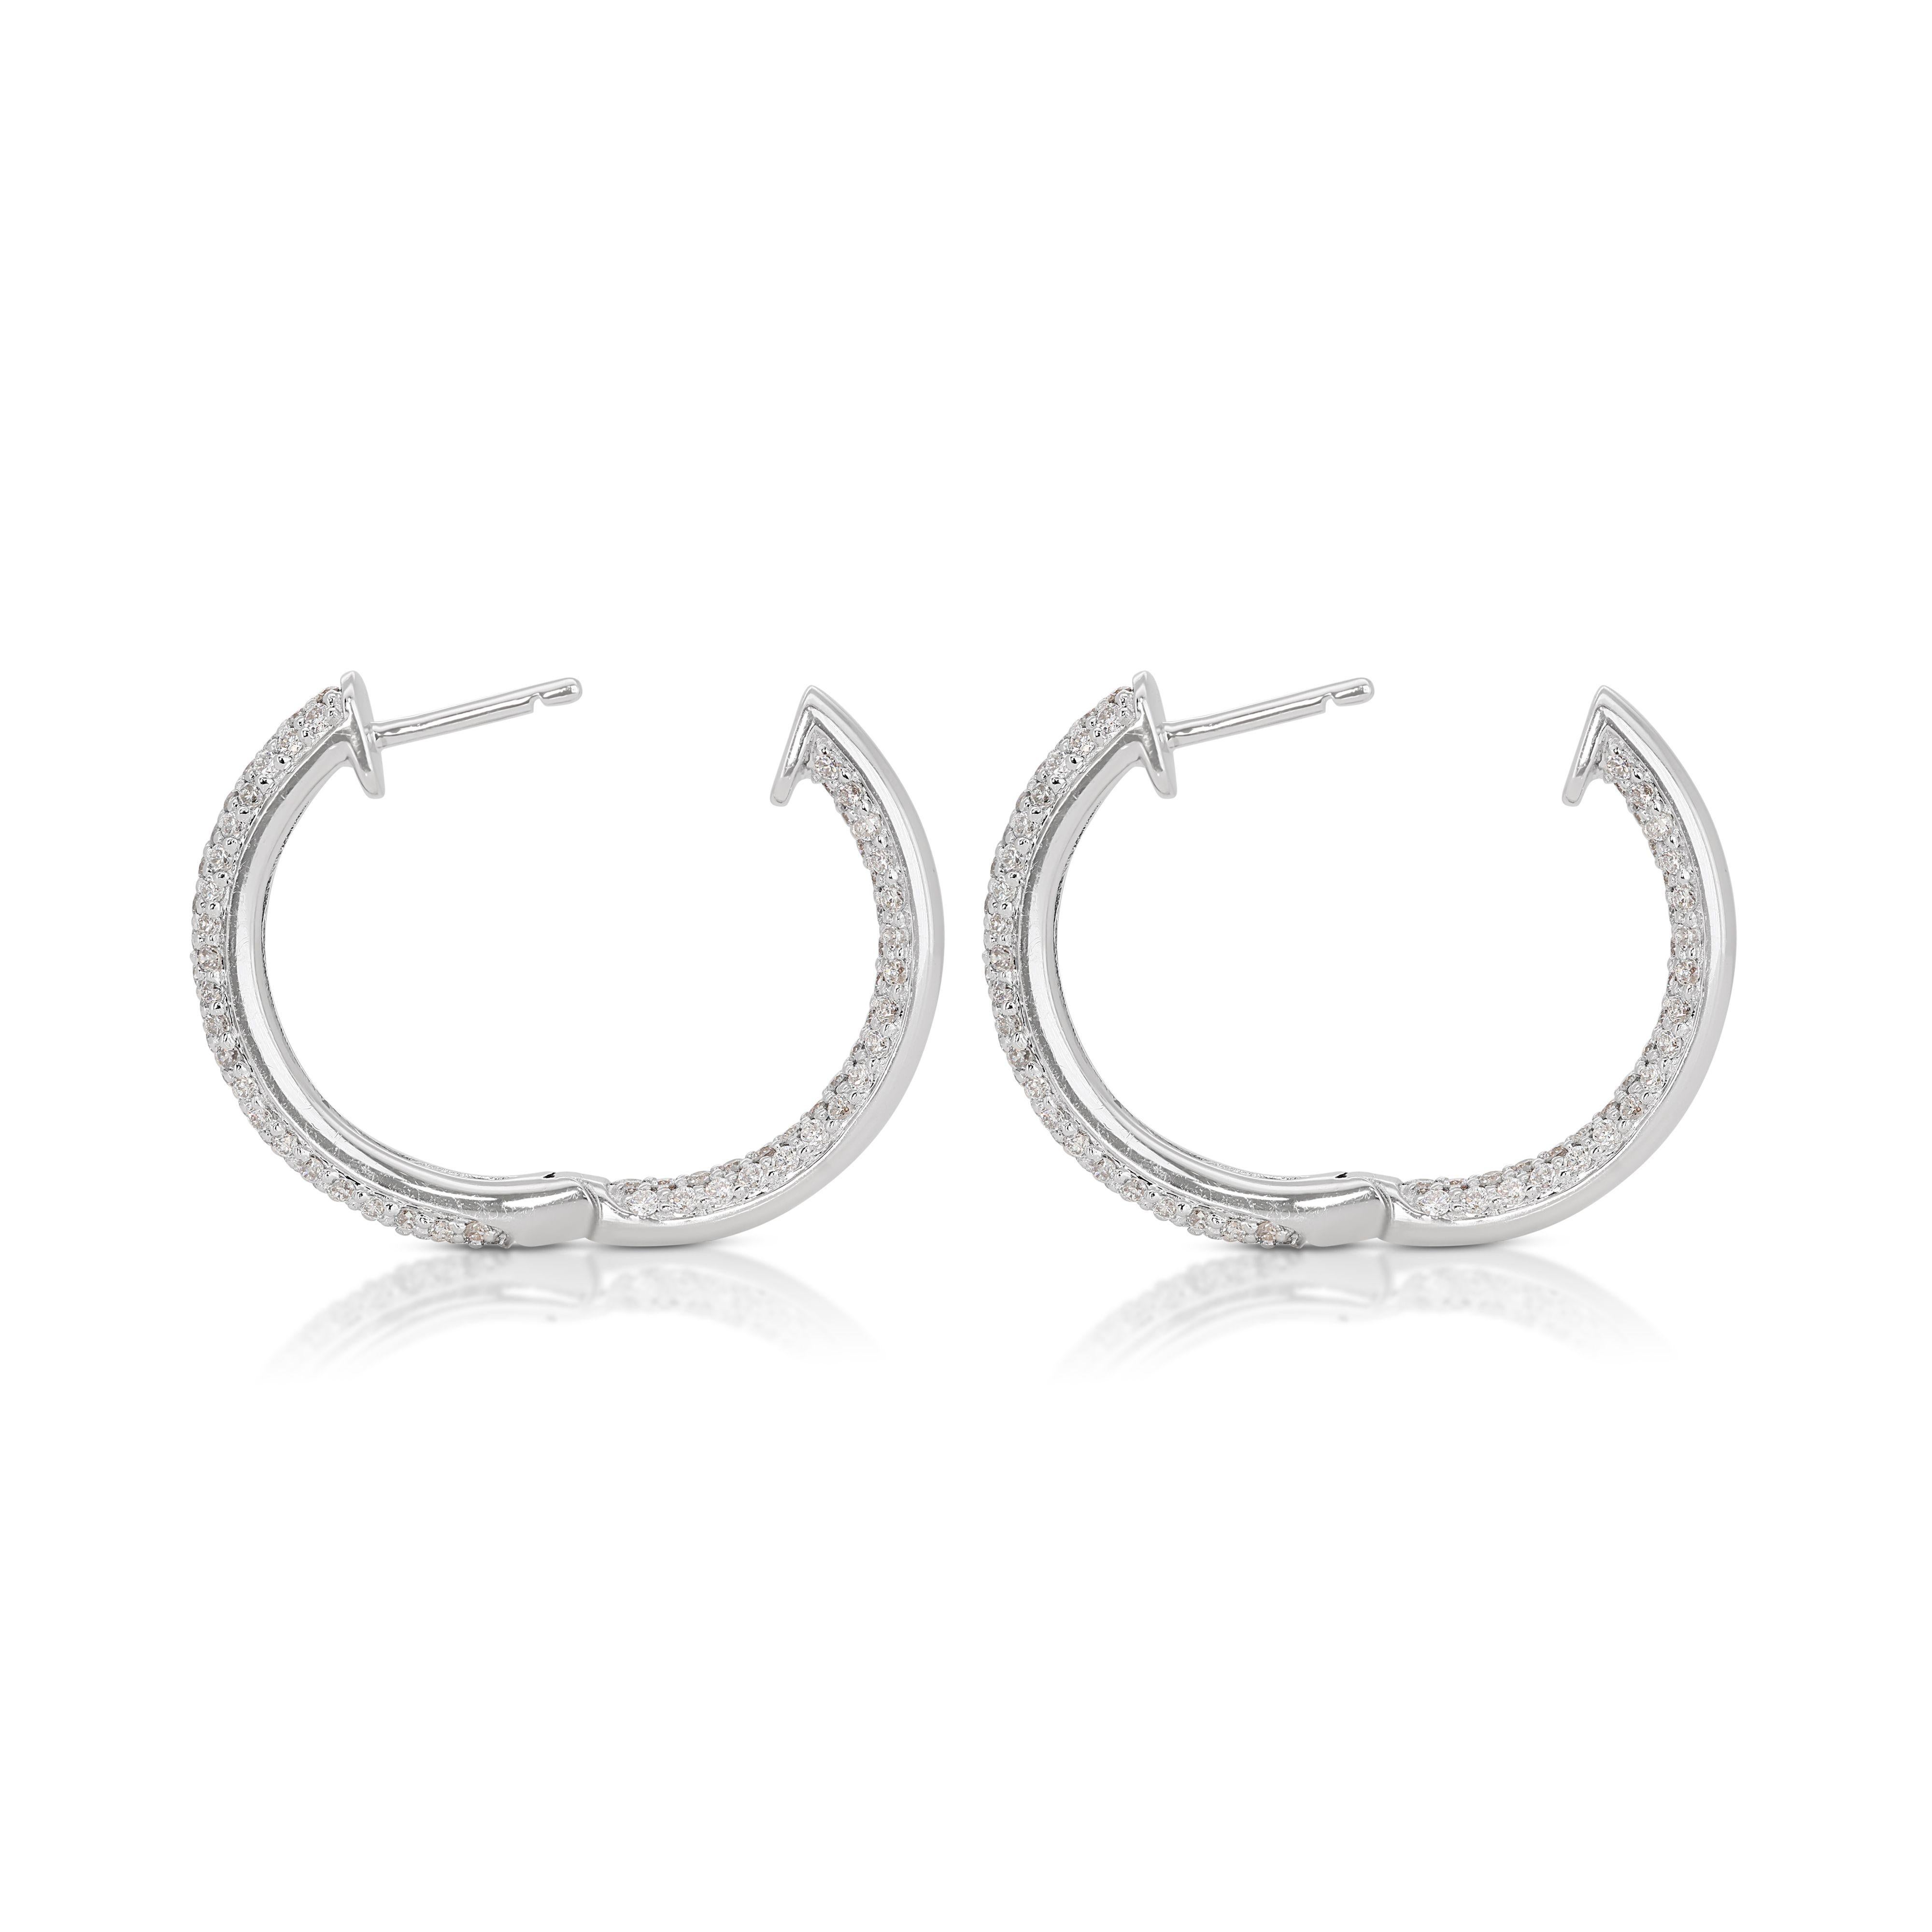 Exquisite 1.15ct Hoop Diamond Earrings set in 18K White Gold For Sale 1